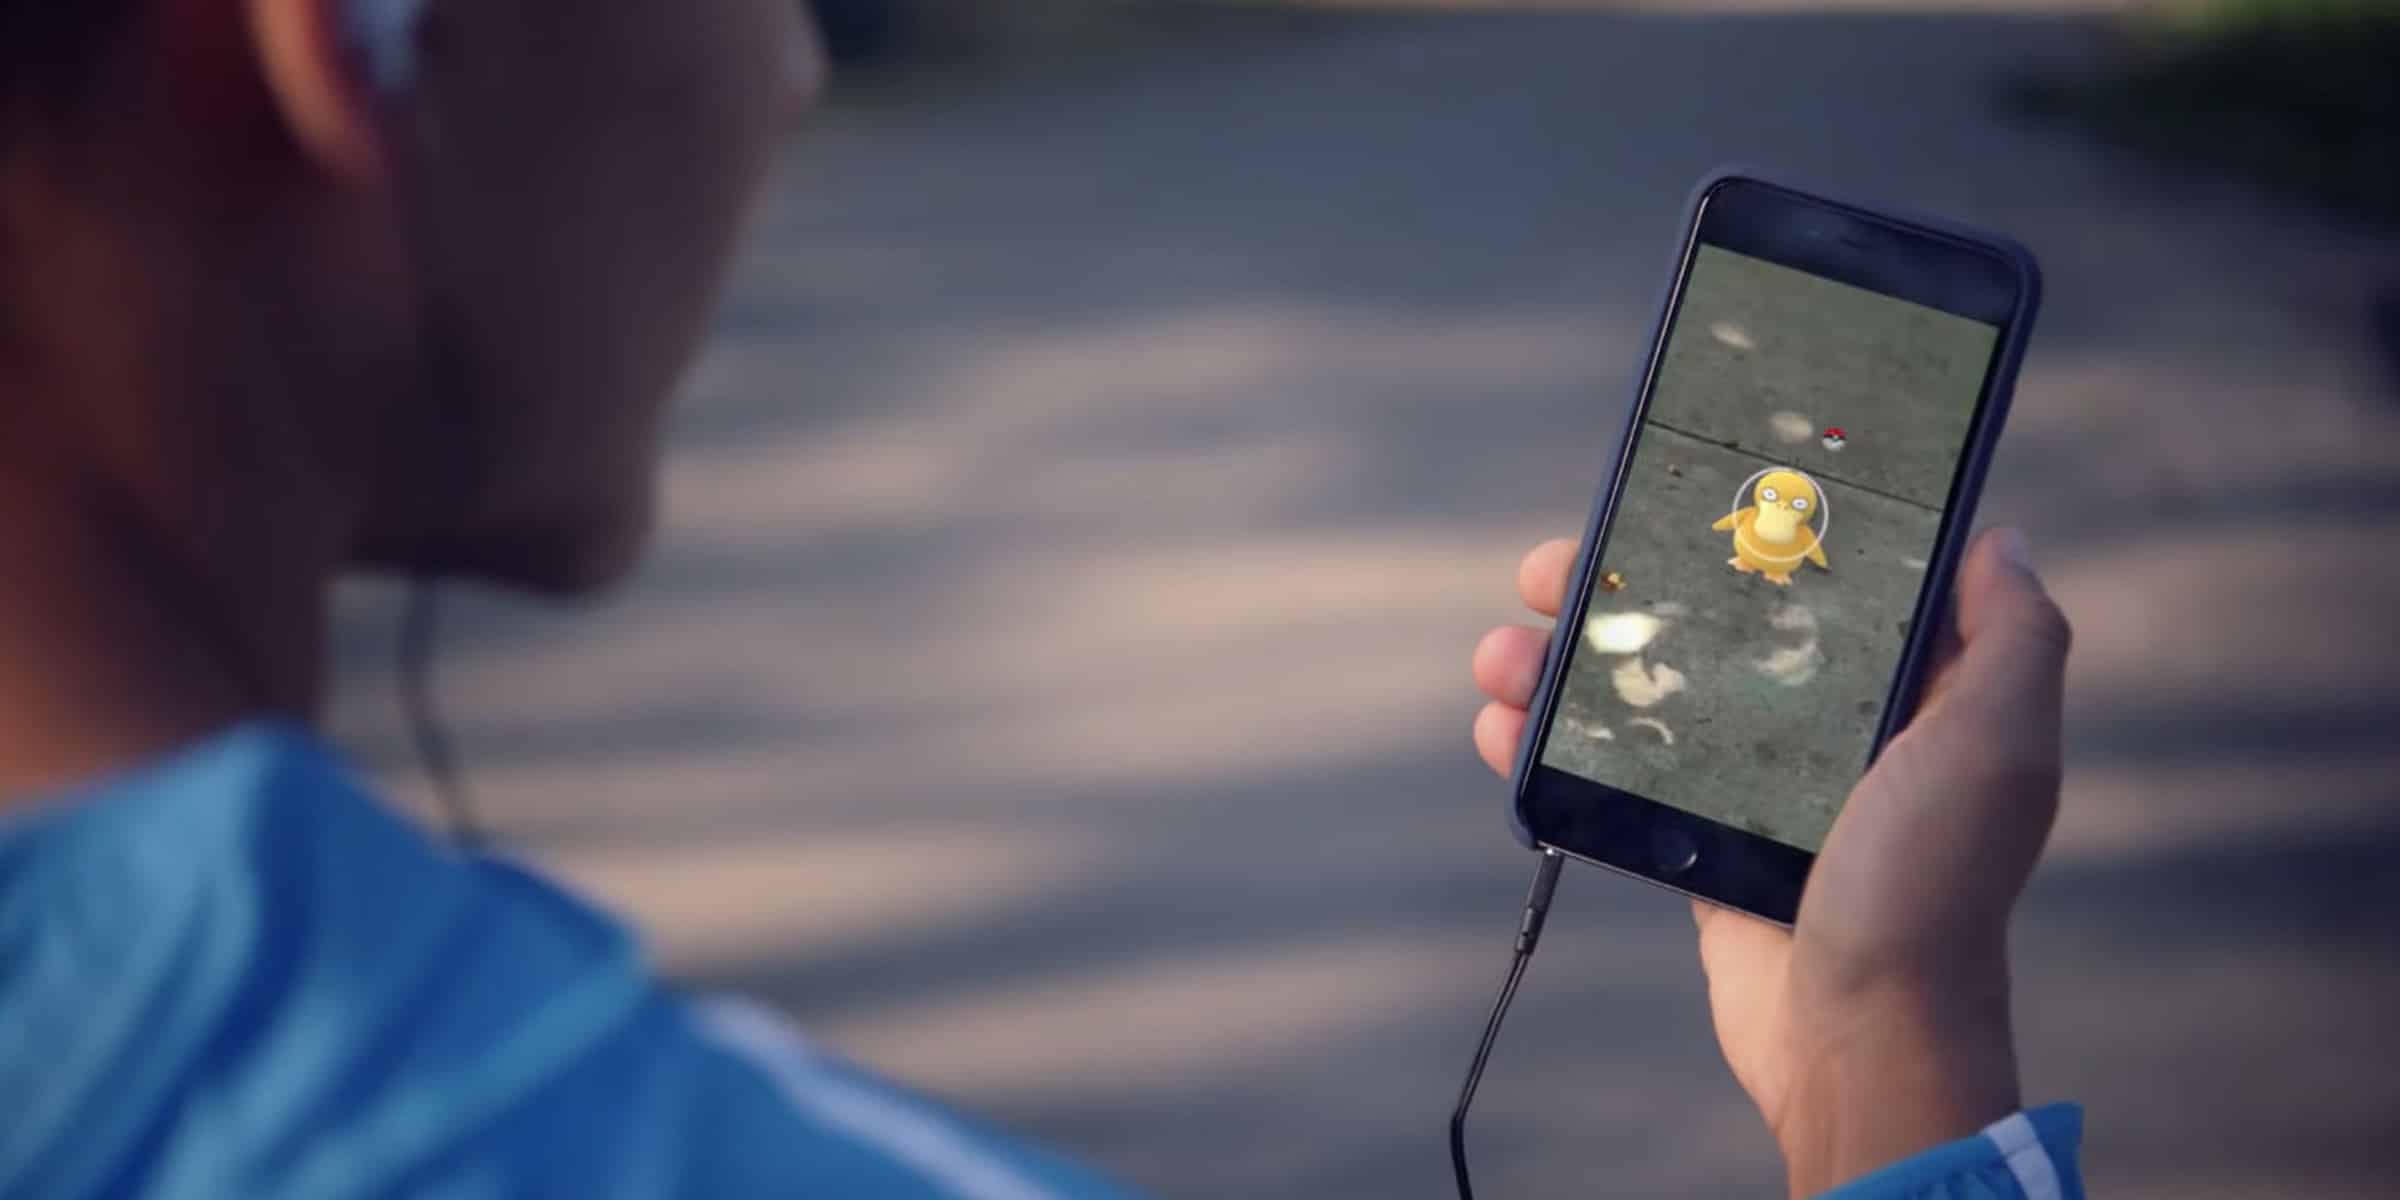 Safety Tips: Catch them all, but be careful while playing Pokémon Go